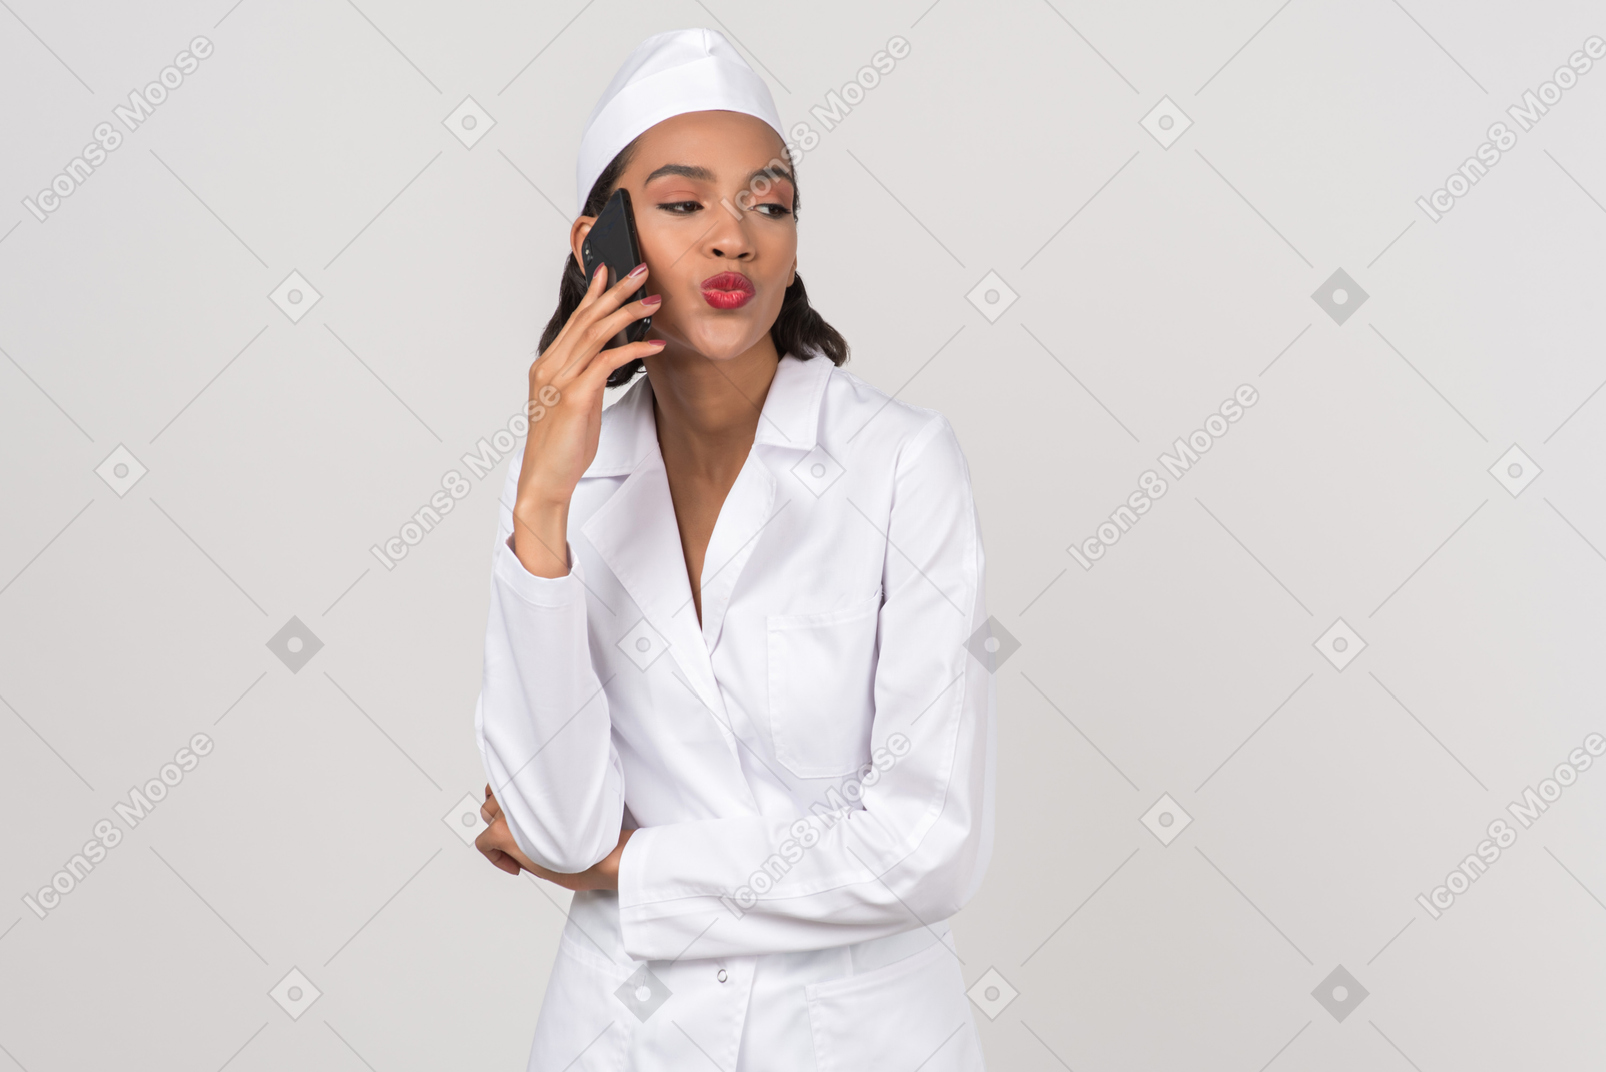 Flirty doctor talking on the phone